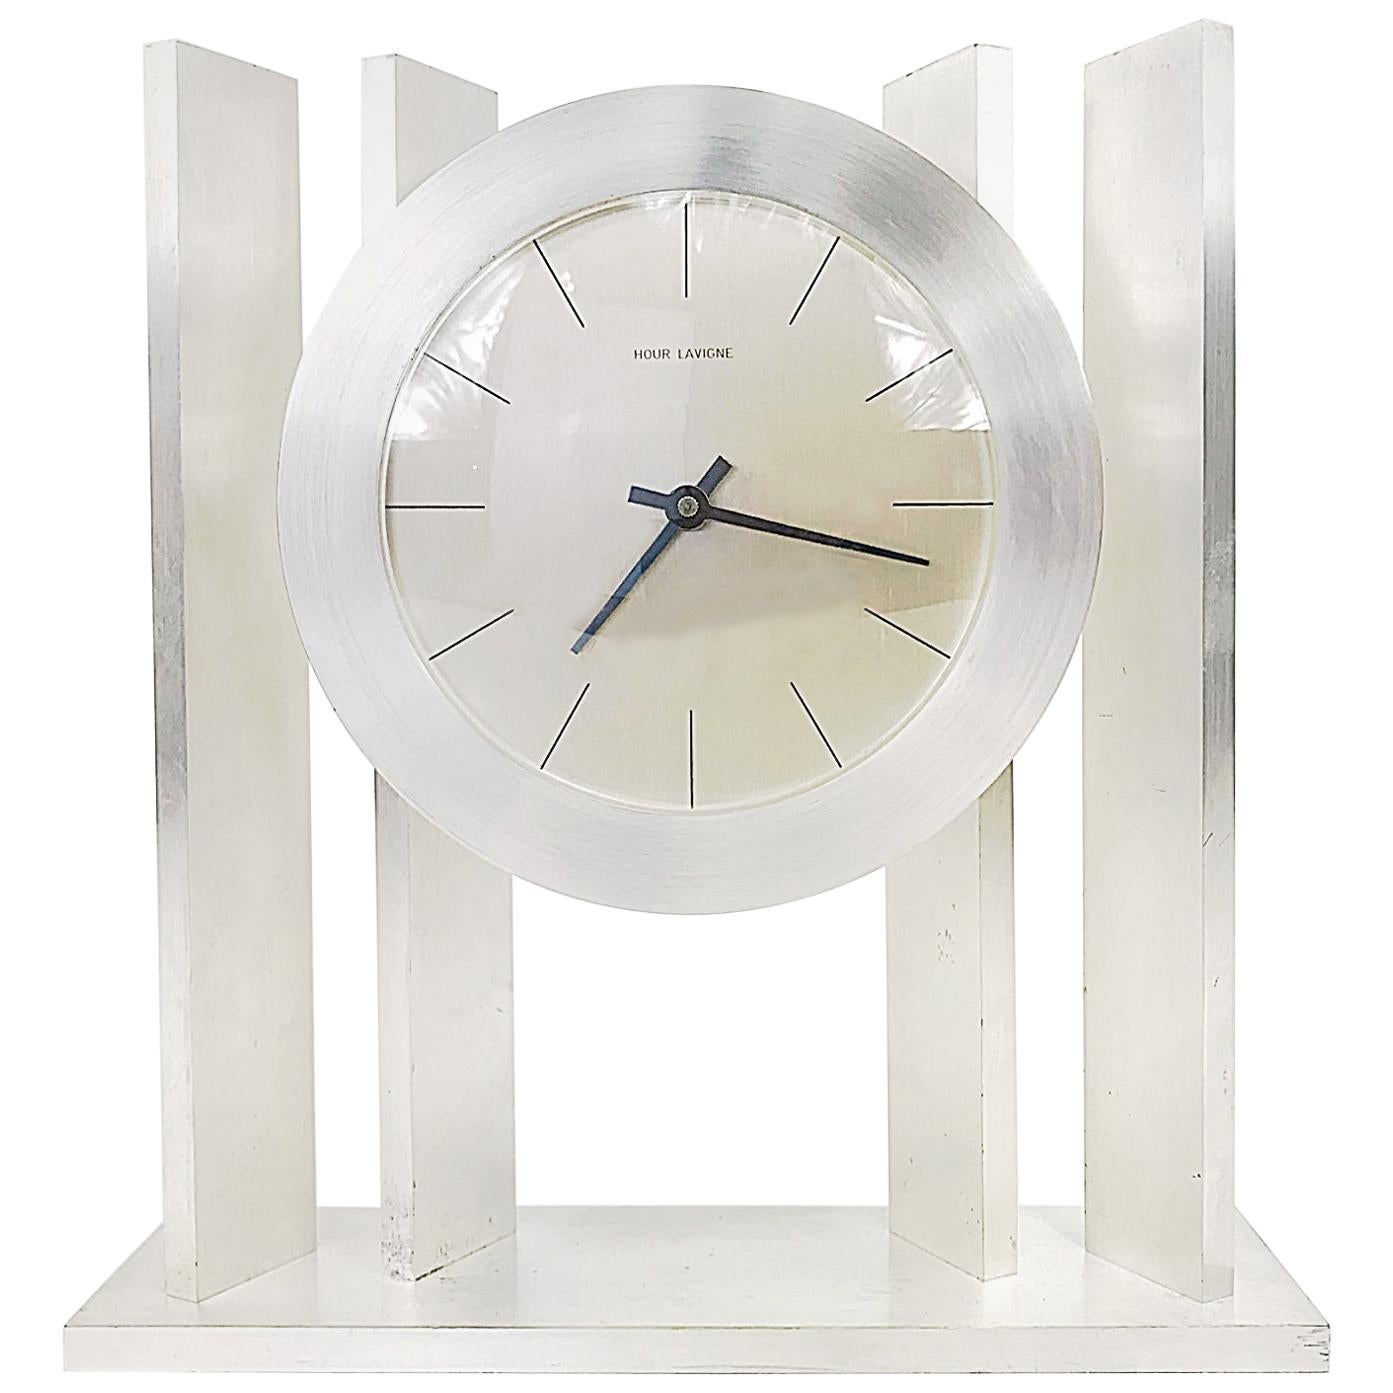 Exclusiv French Hour Lavigne Silvered Automatic Table Clock, 1960s, France